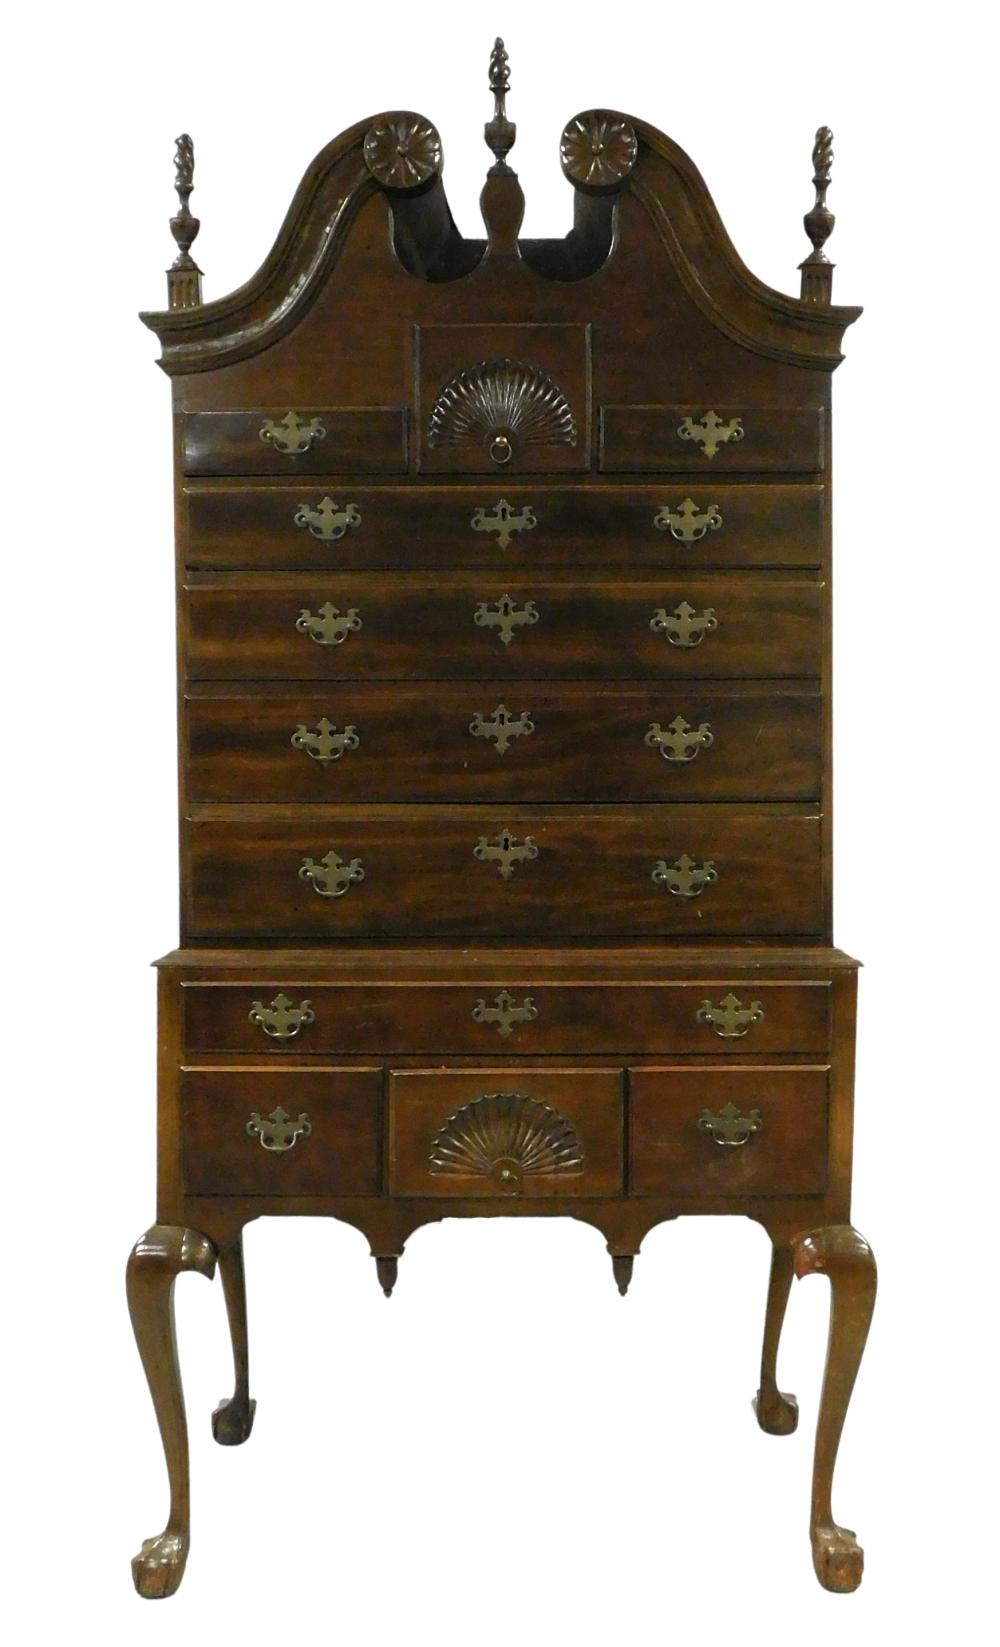 CHIPPENDALE HIGHBOY LATE 18TH 2defdc